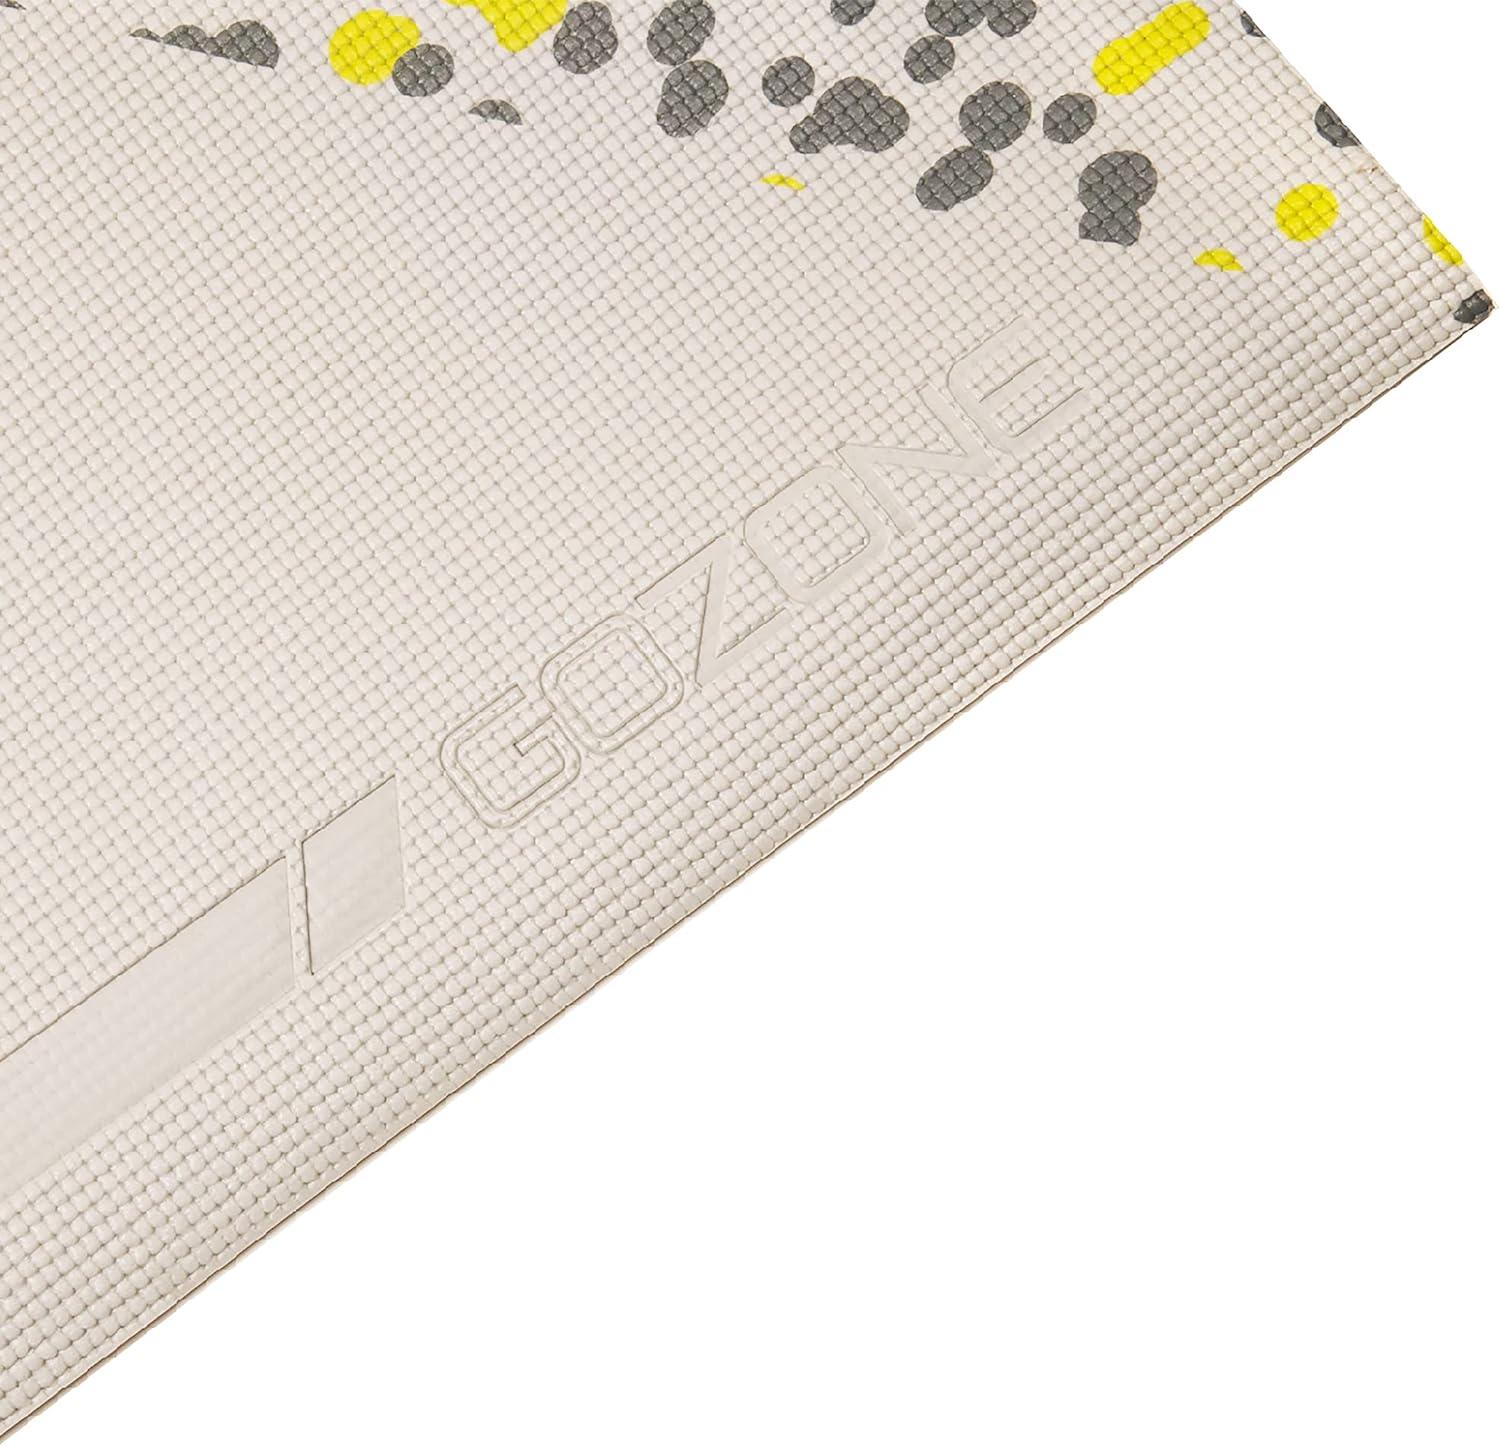 GoZone Yoga Exercise Mat 24x68in, 6mm Thick, Non-Slip Surface, Grey - Massive Discounts